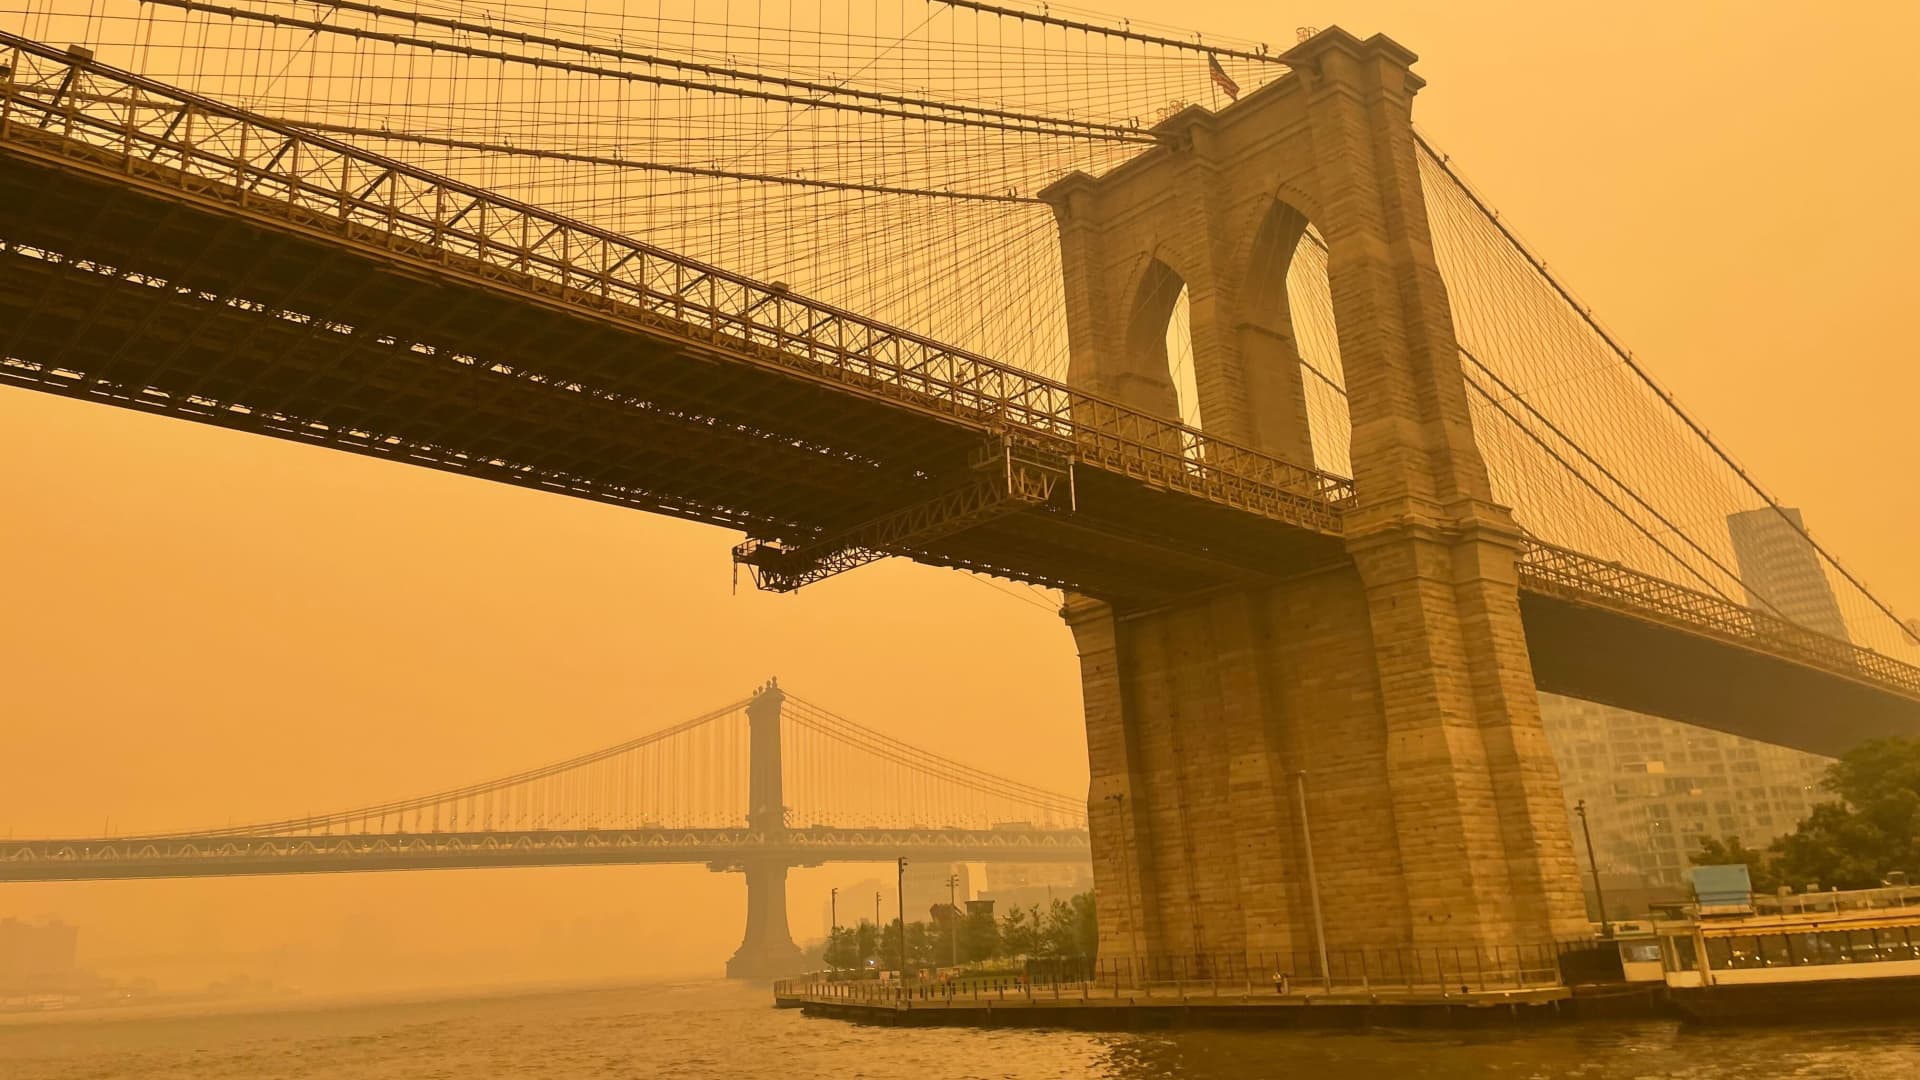 Google tells employees in New York and along the East Coast to work from home as smoke fills the air